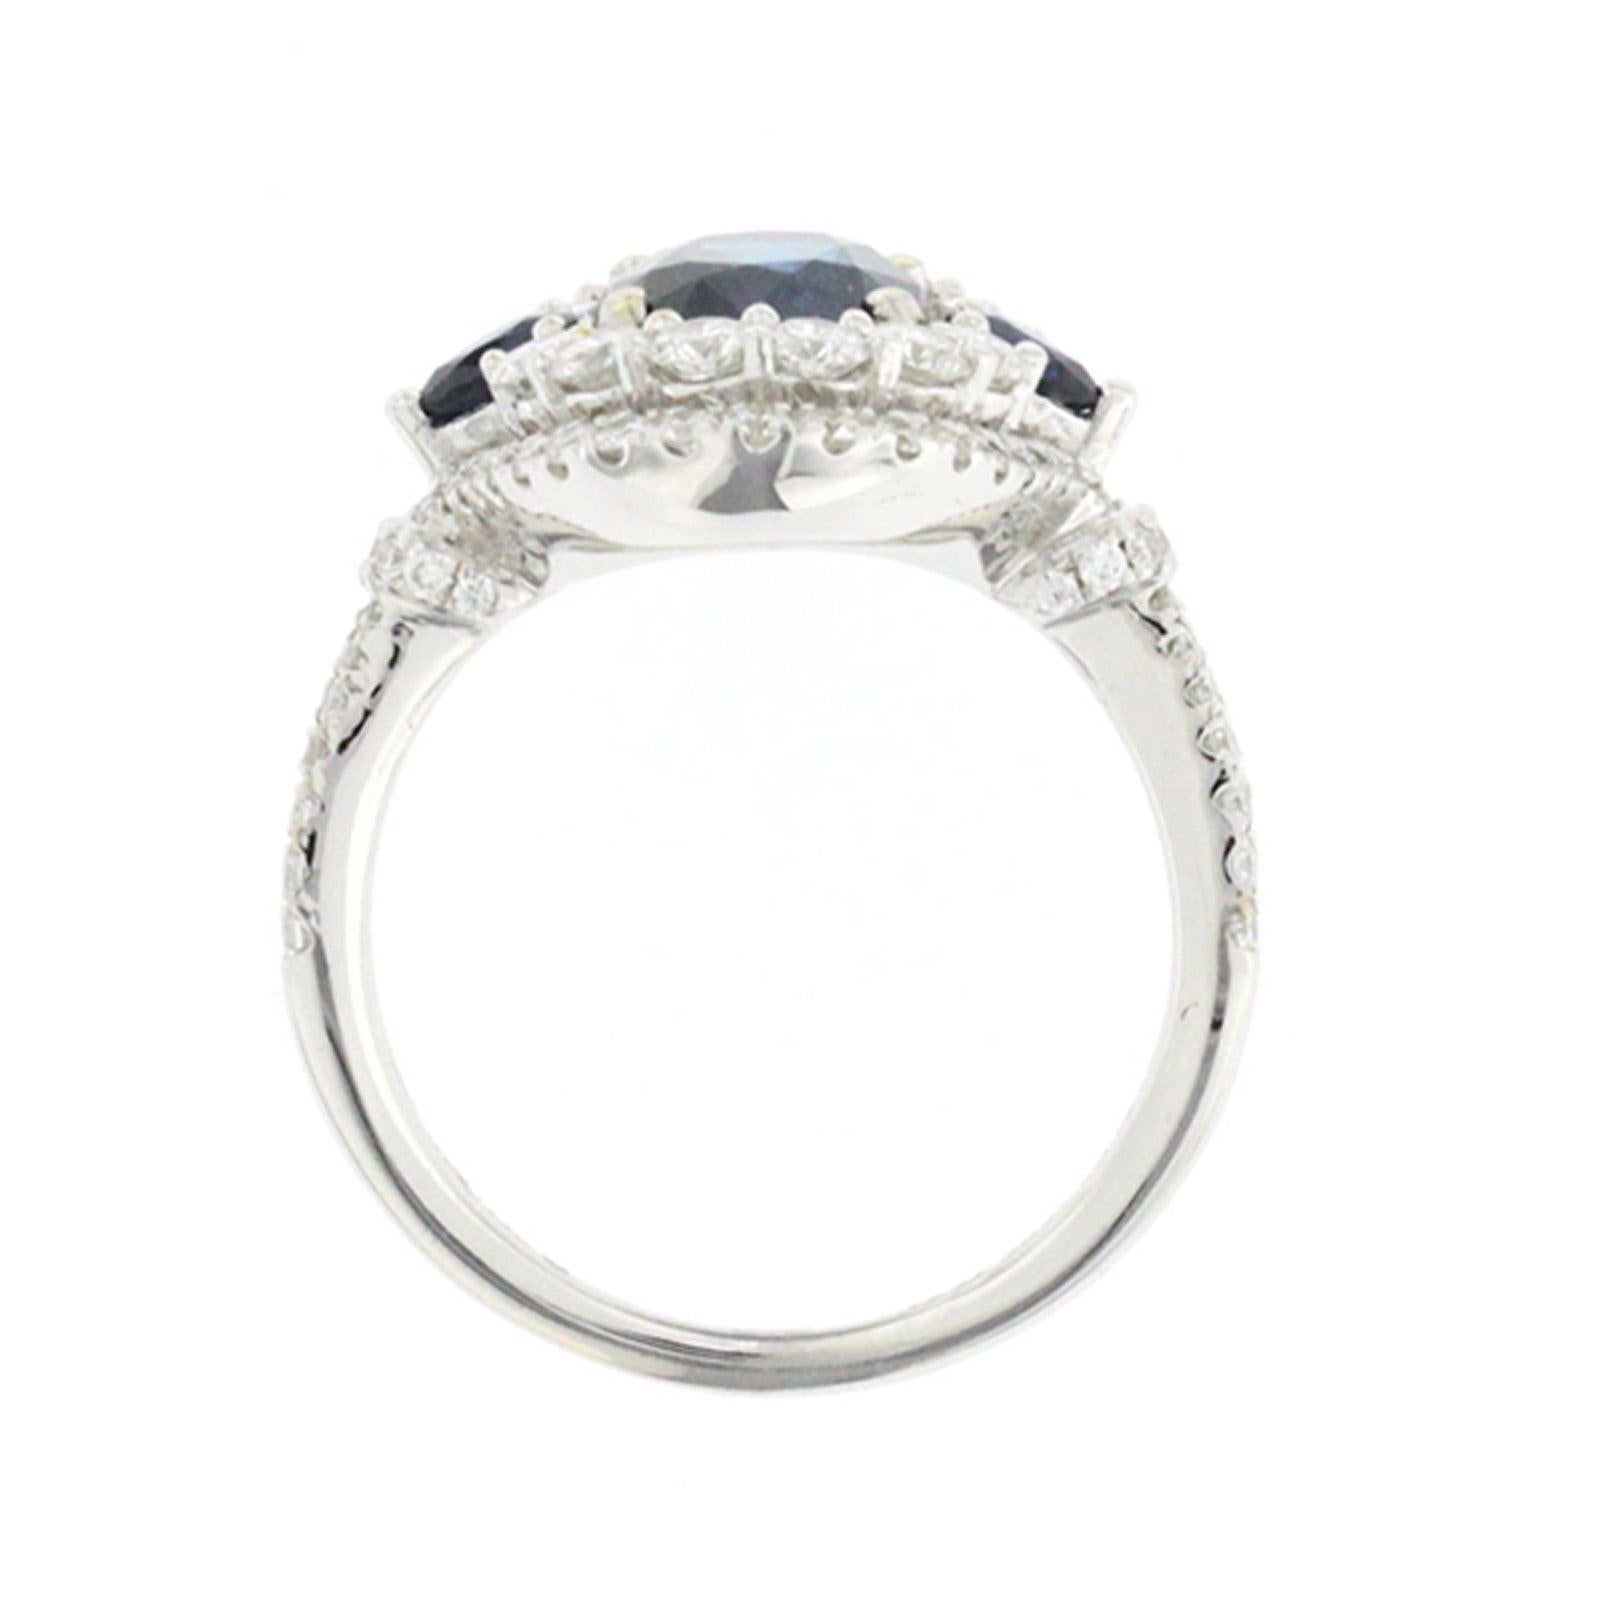 2.57 CT Ceylon Sapphires & 1.09 CT Diamonds in 18K White Gold Engagement Ring In New Condition For Sale In Los Angeles, CA